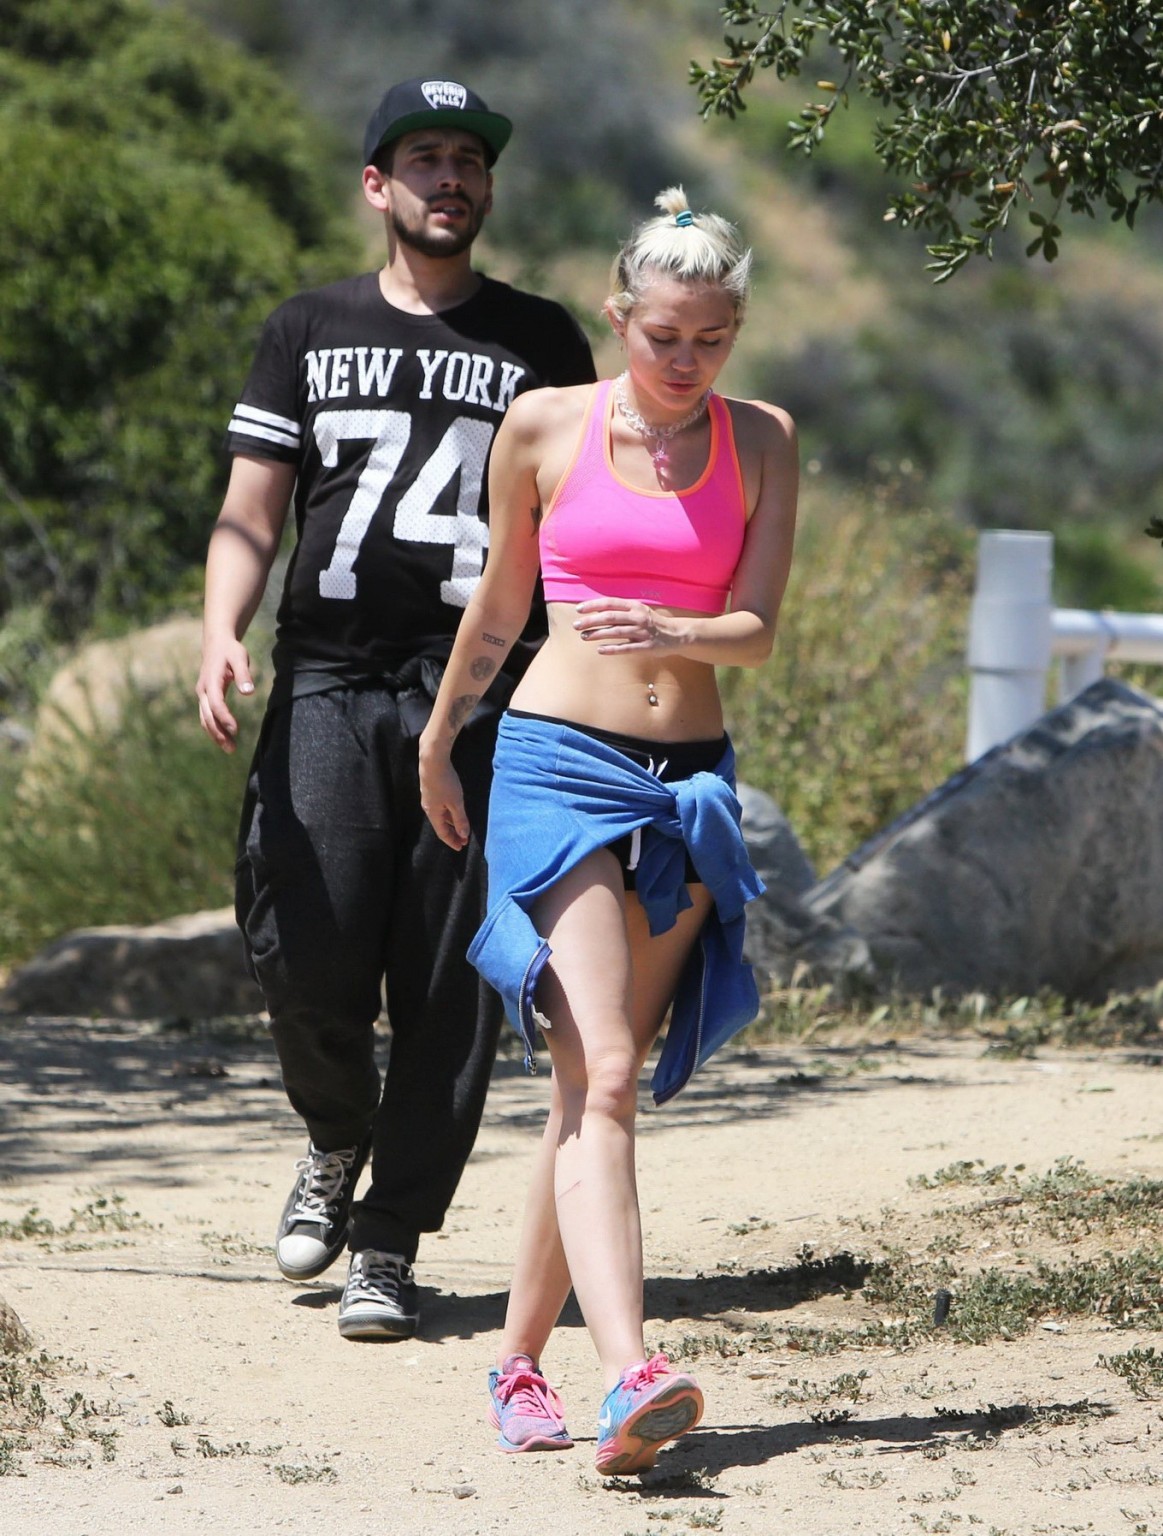 Miley Cyrus wearing pink sports bra and shorts out for a hike in LA #75166640